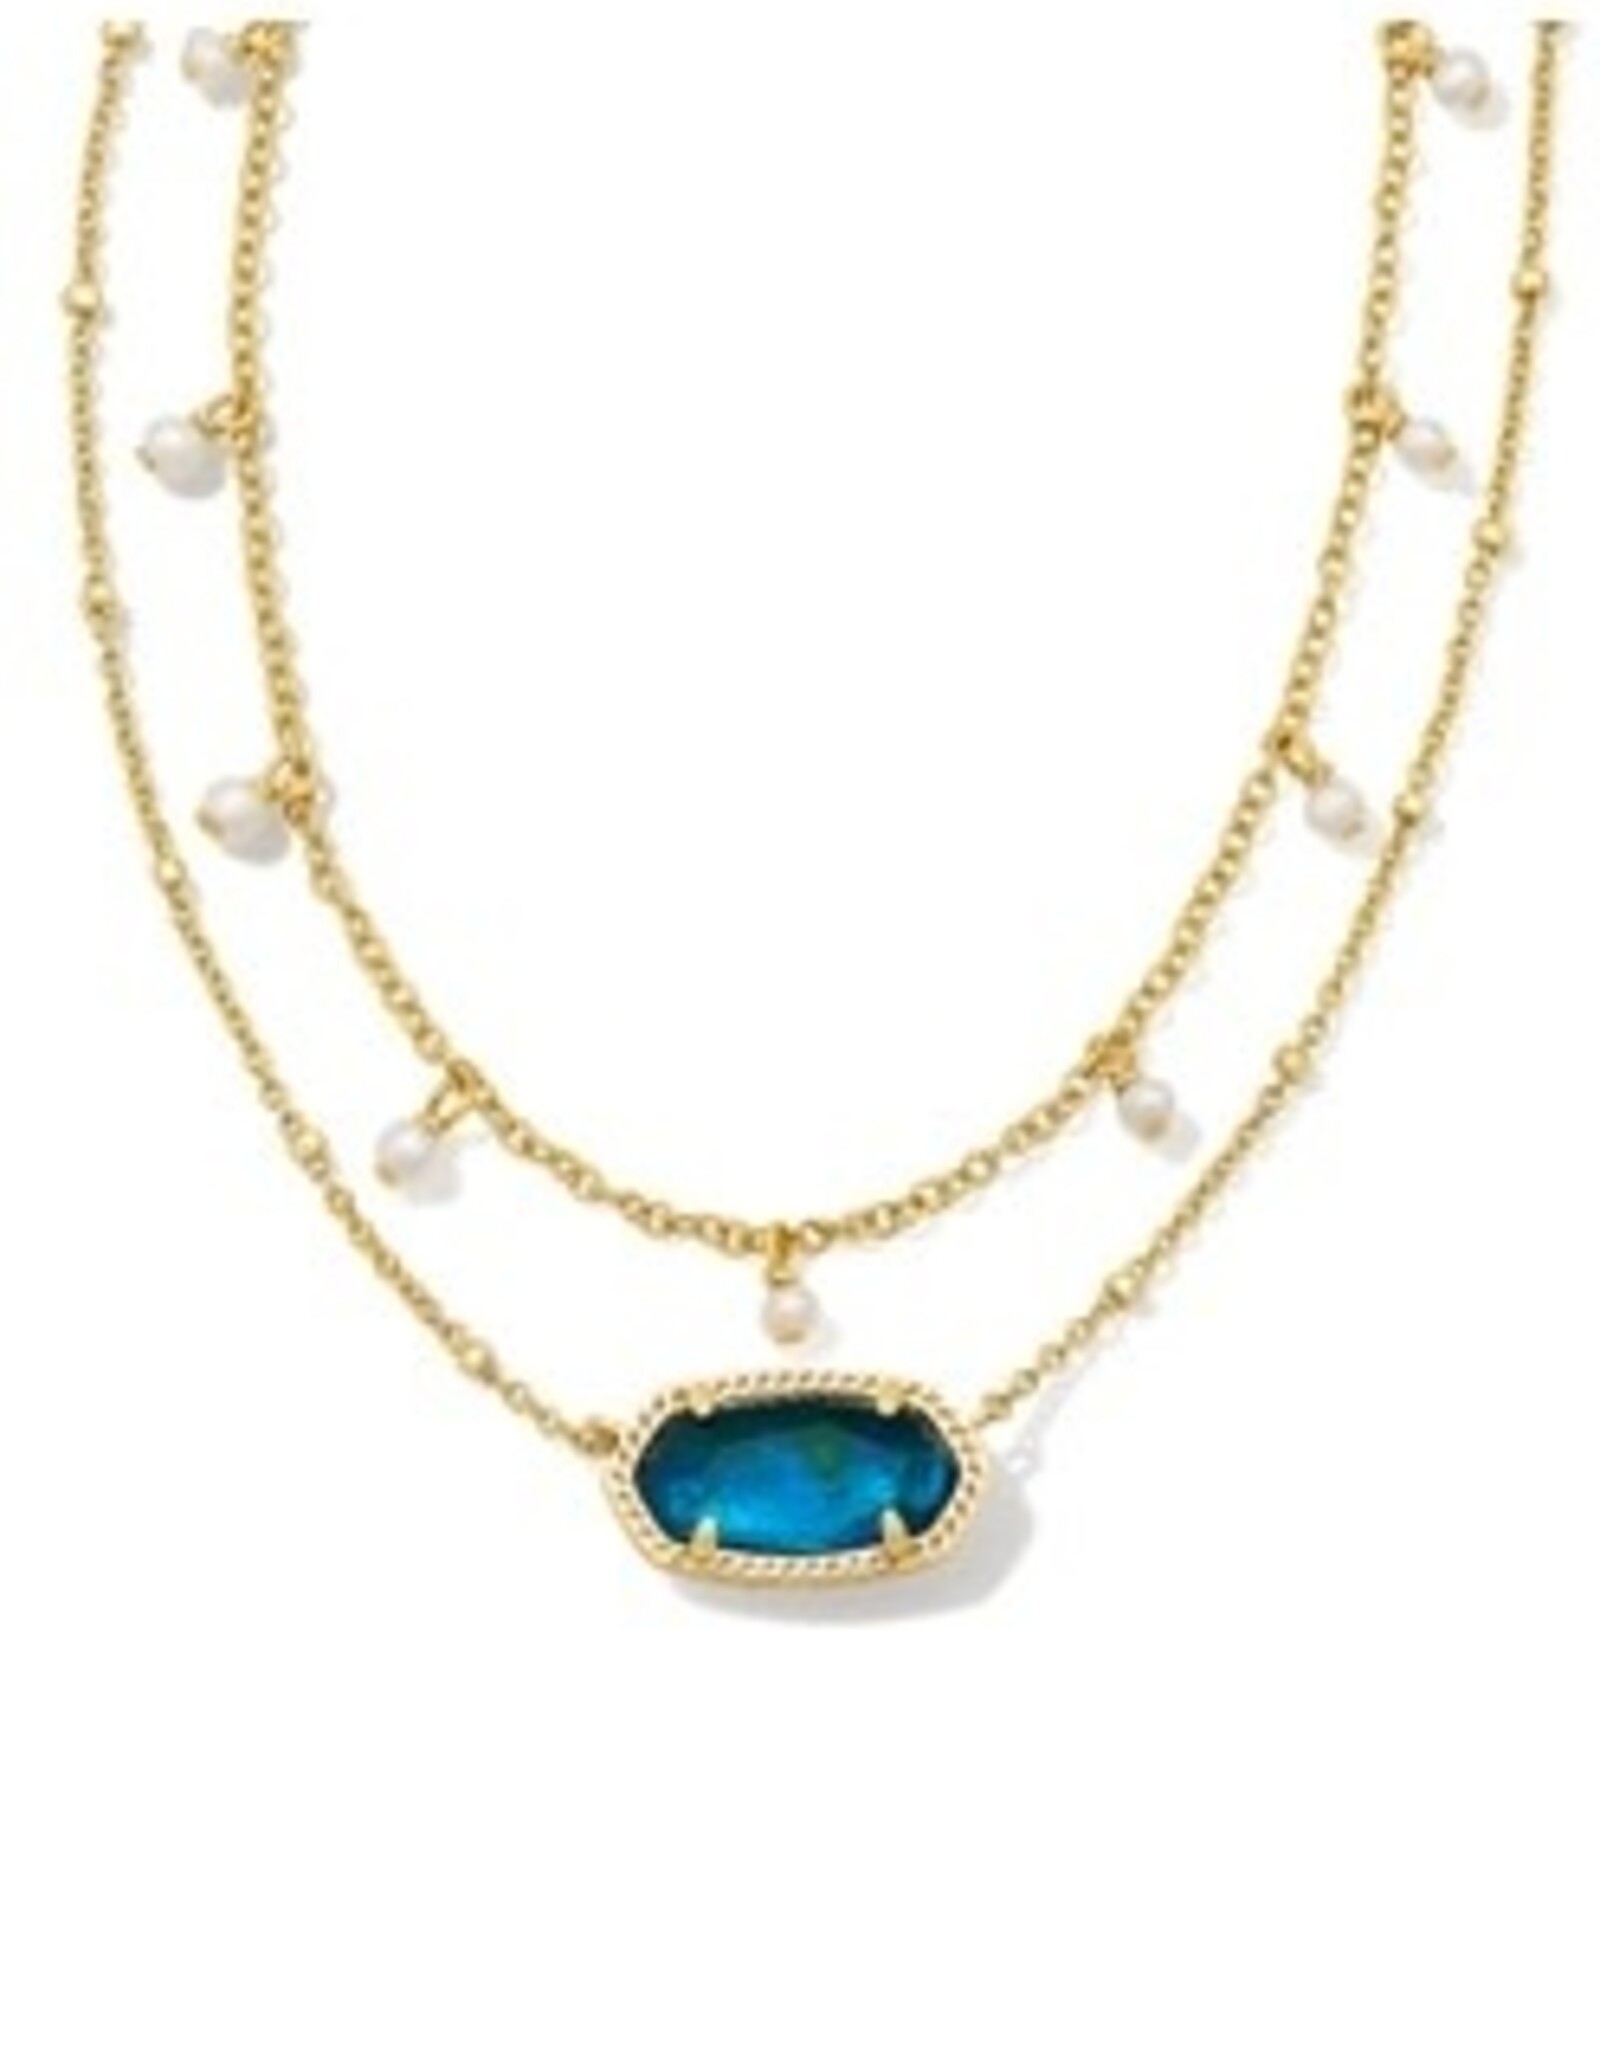 Kendra Scott Elisa Pearl Multi Strand Necklace Gold/Teal Abalone